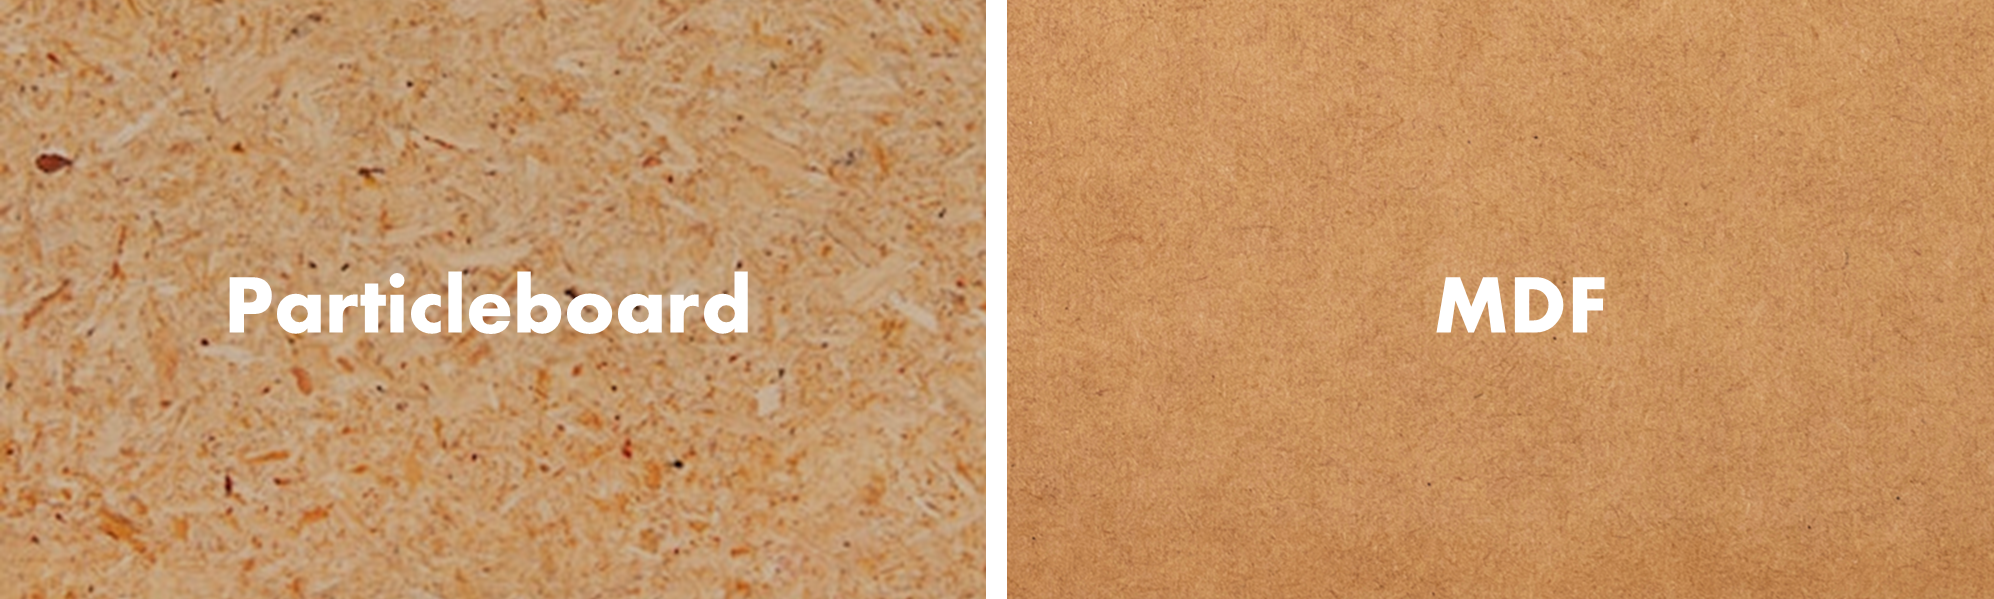 Particleboard VS MDF